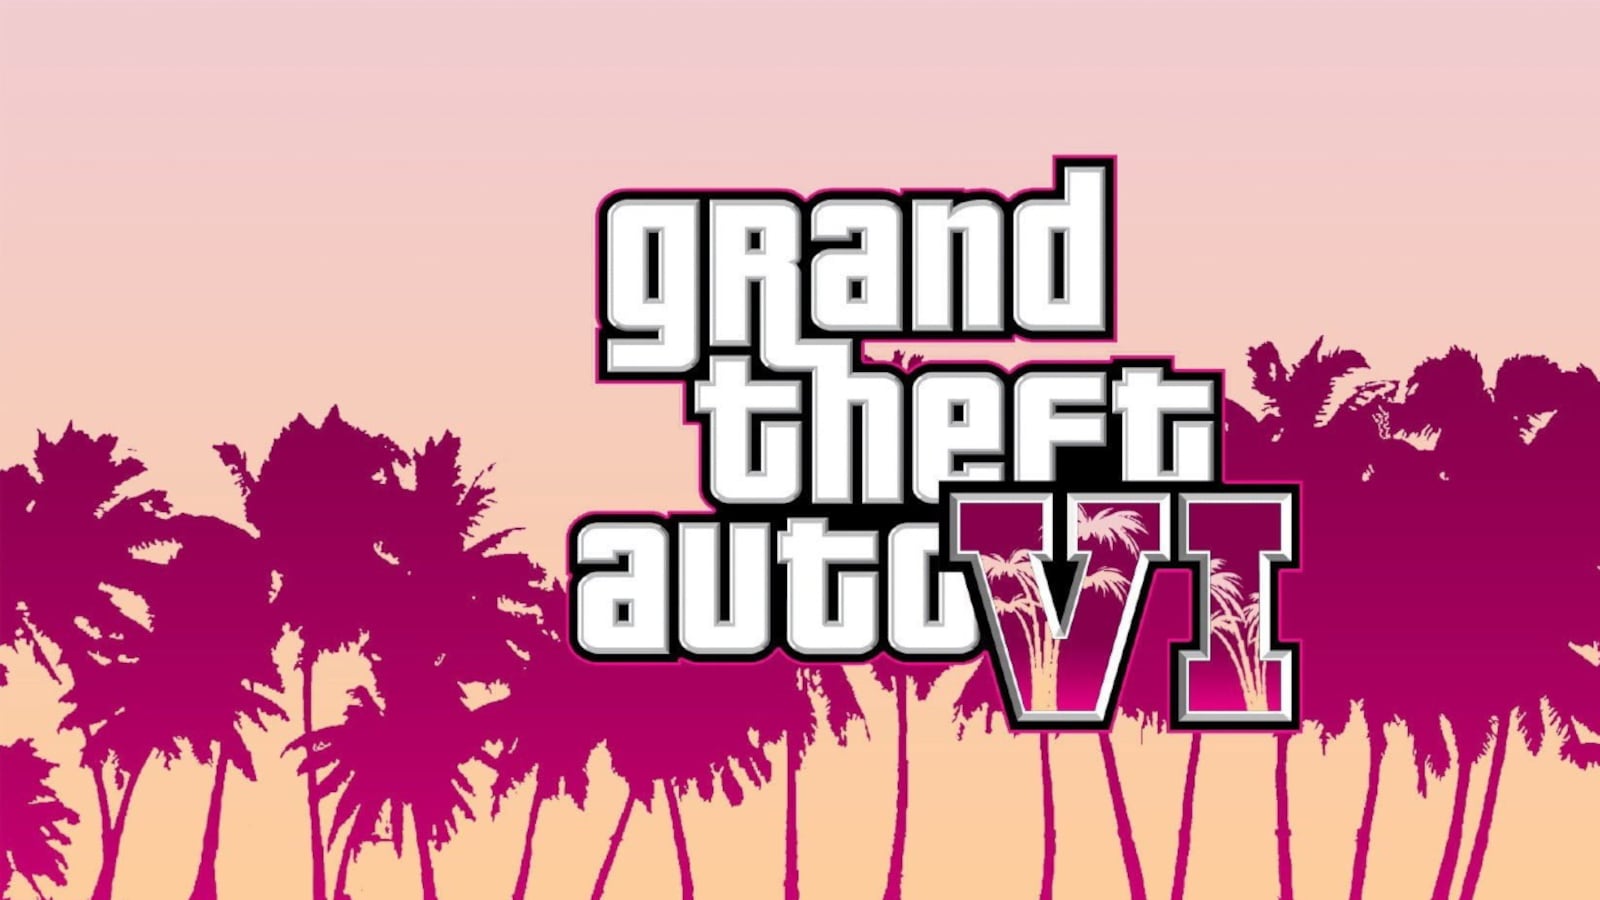 Uber Hacker Claims To Have Hacked Rockstar Games, Leaks GTA 6 Videos